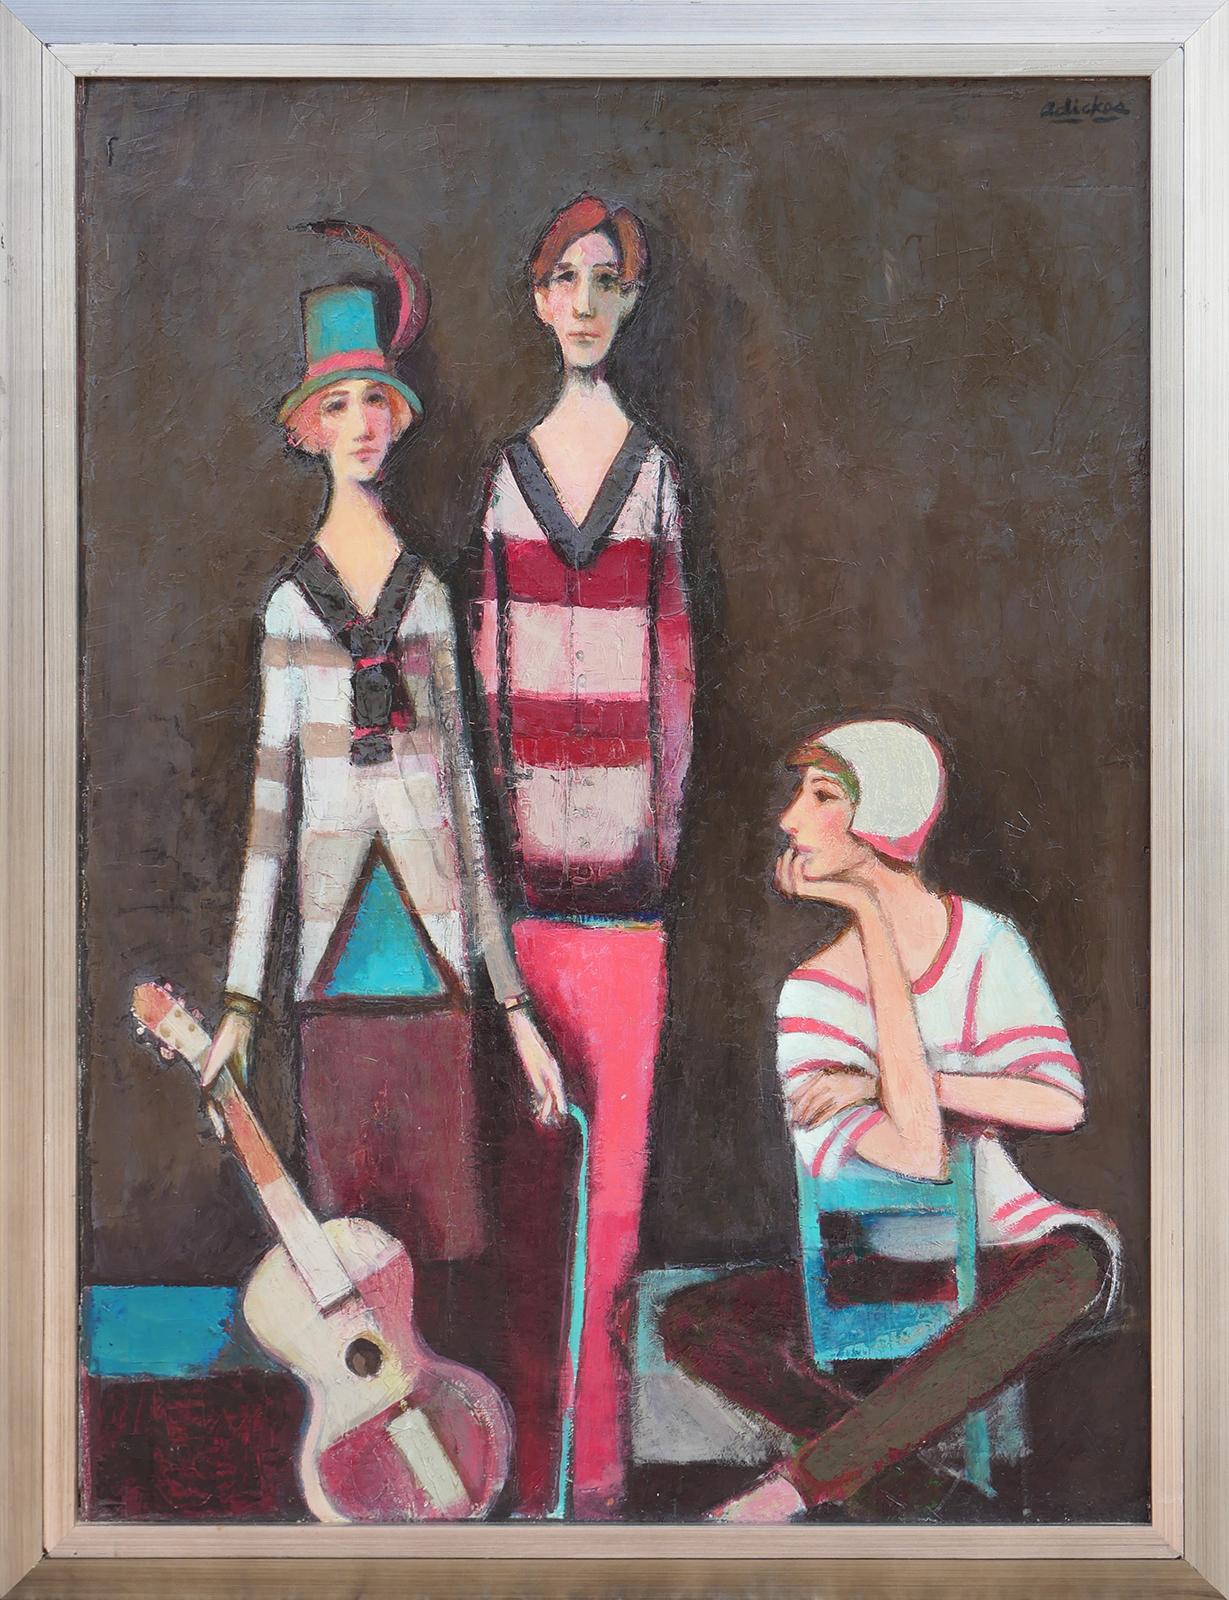 David Adickes Figurative Painting - "One Man, Two Ladies with Guitar" Abstract Figurative Portrait Painting 